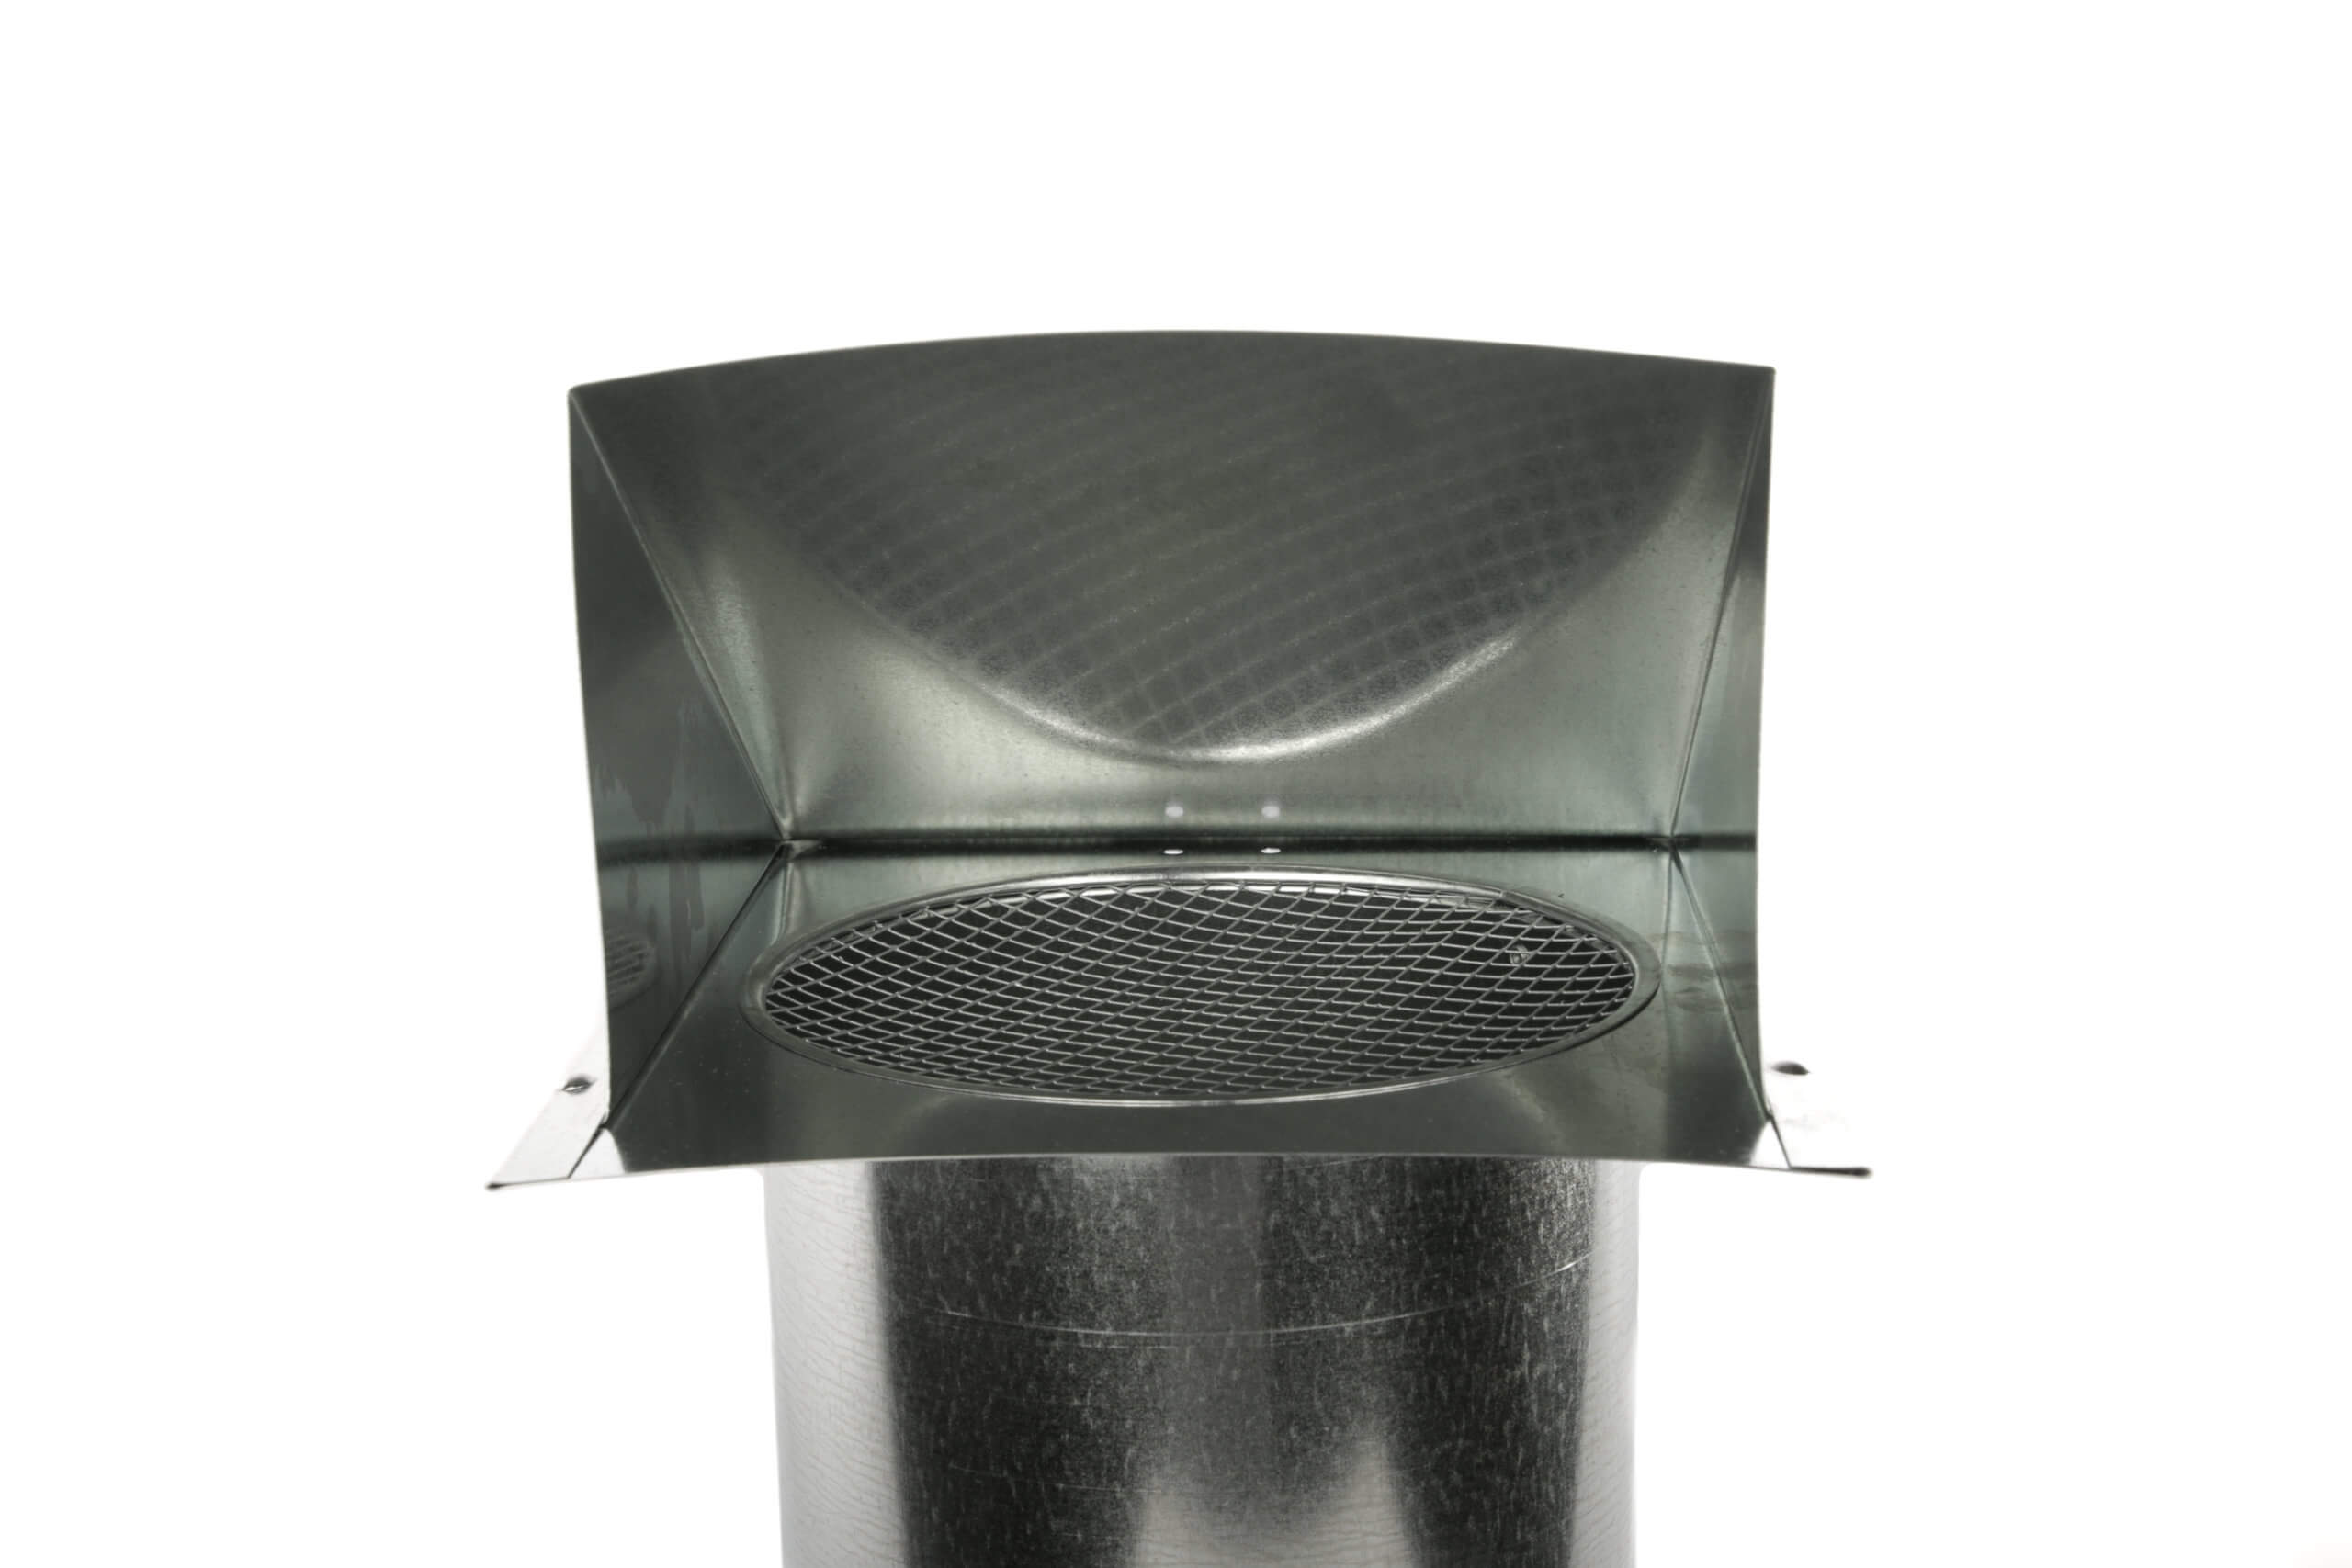 FAMCO Hooded Wall Vent with Screen (No Damper) - Galvanized Steel (Front View)